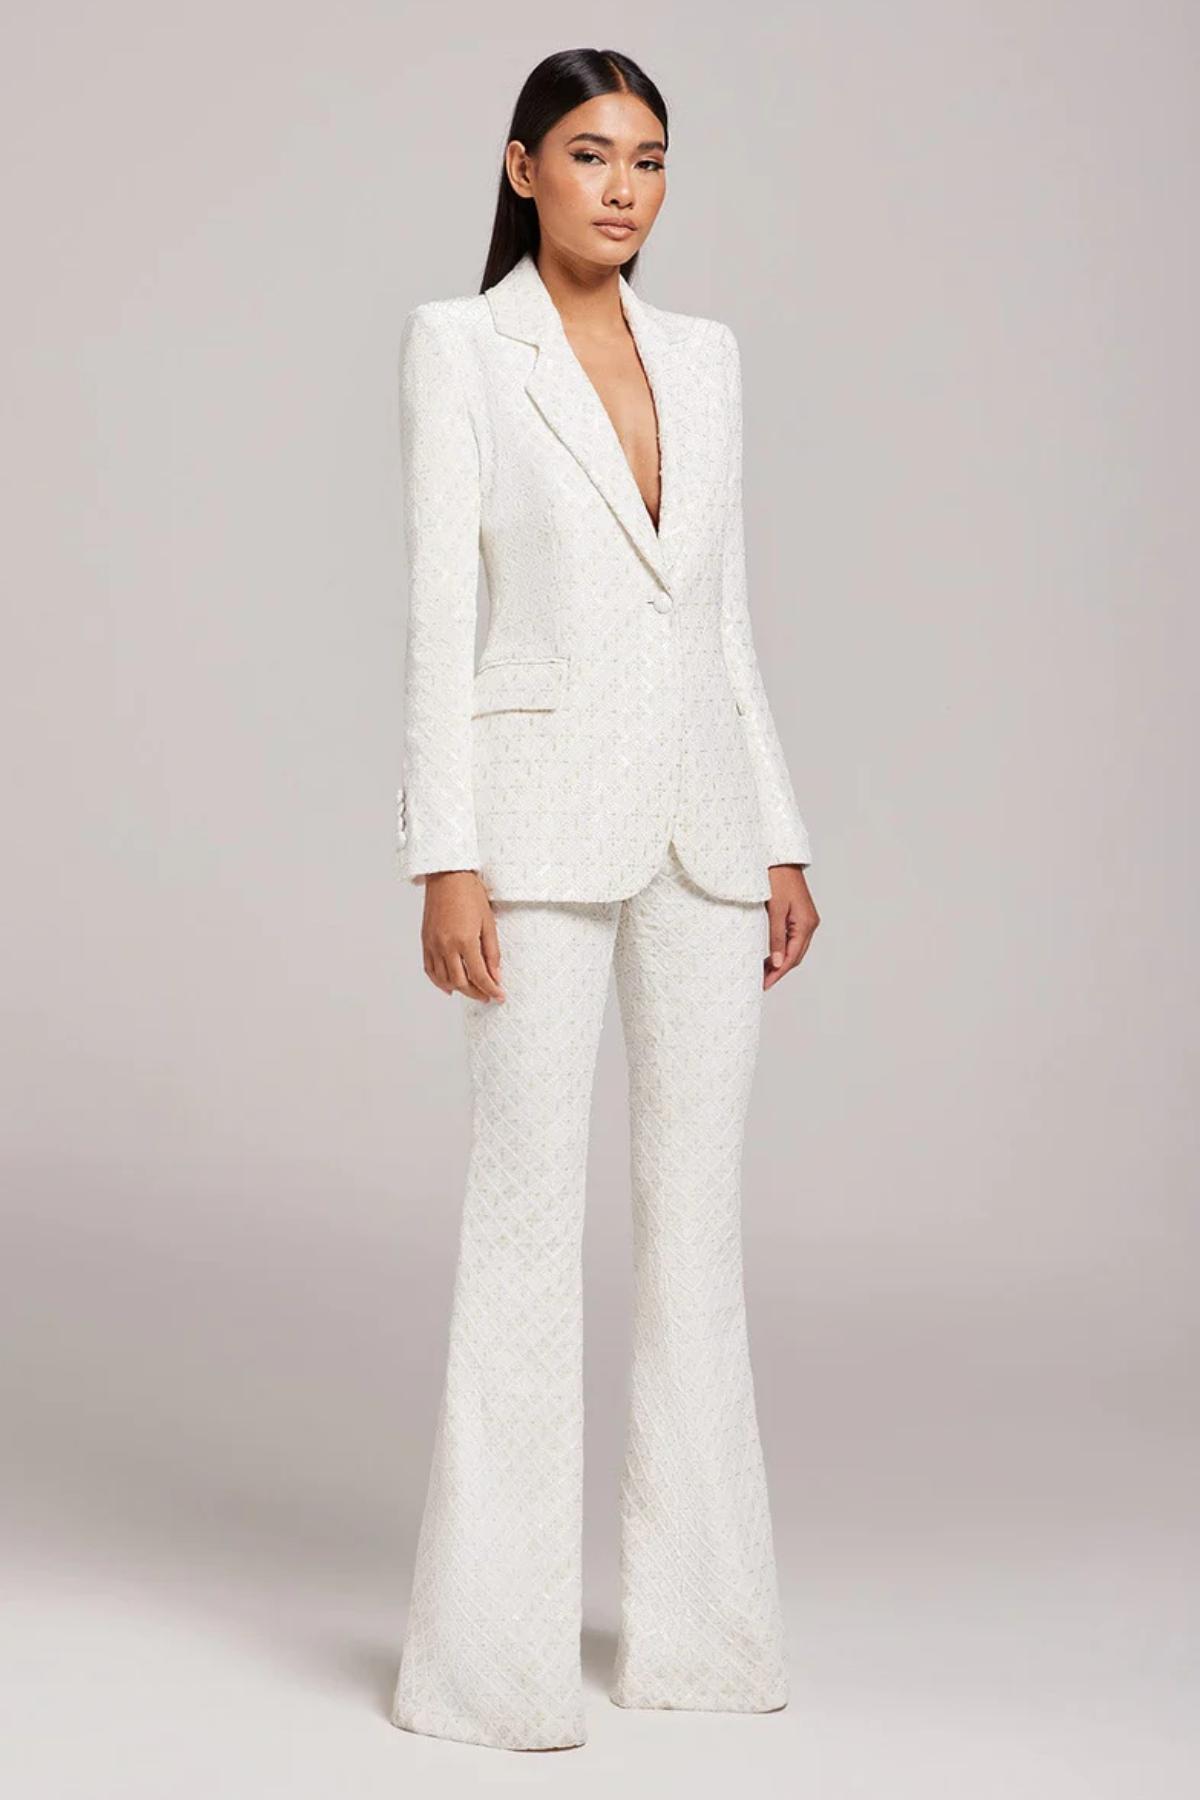 Wedding Suits for Women: 20 Stylish & Powerful Bridal Trouser Suits 